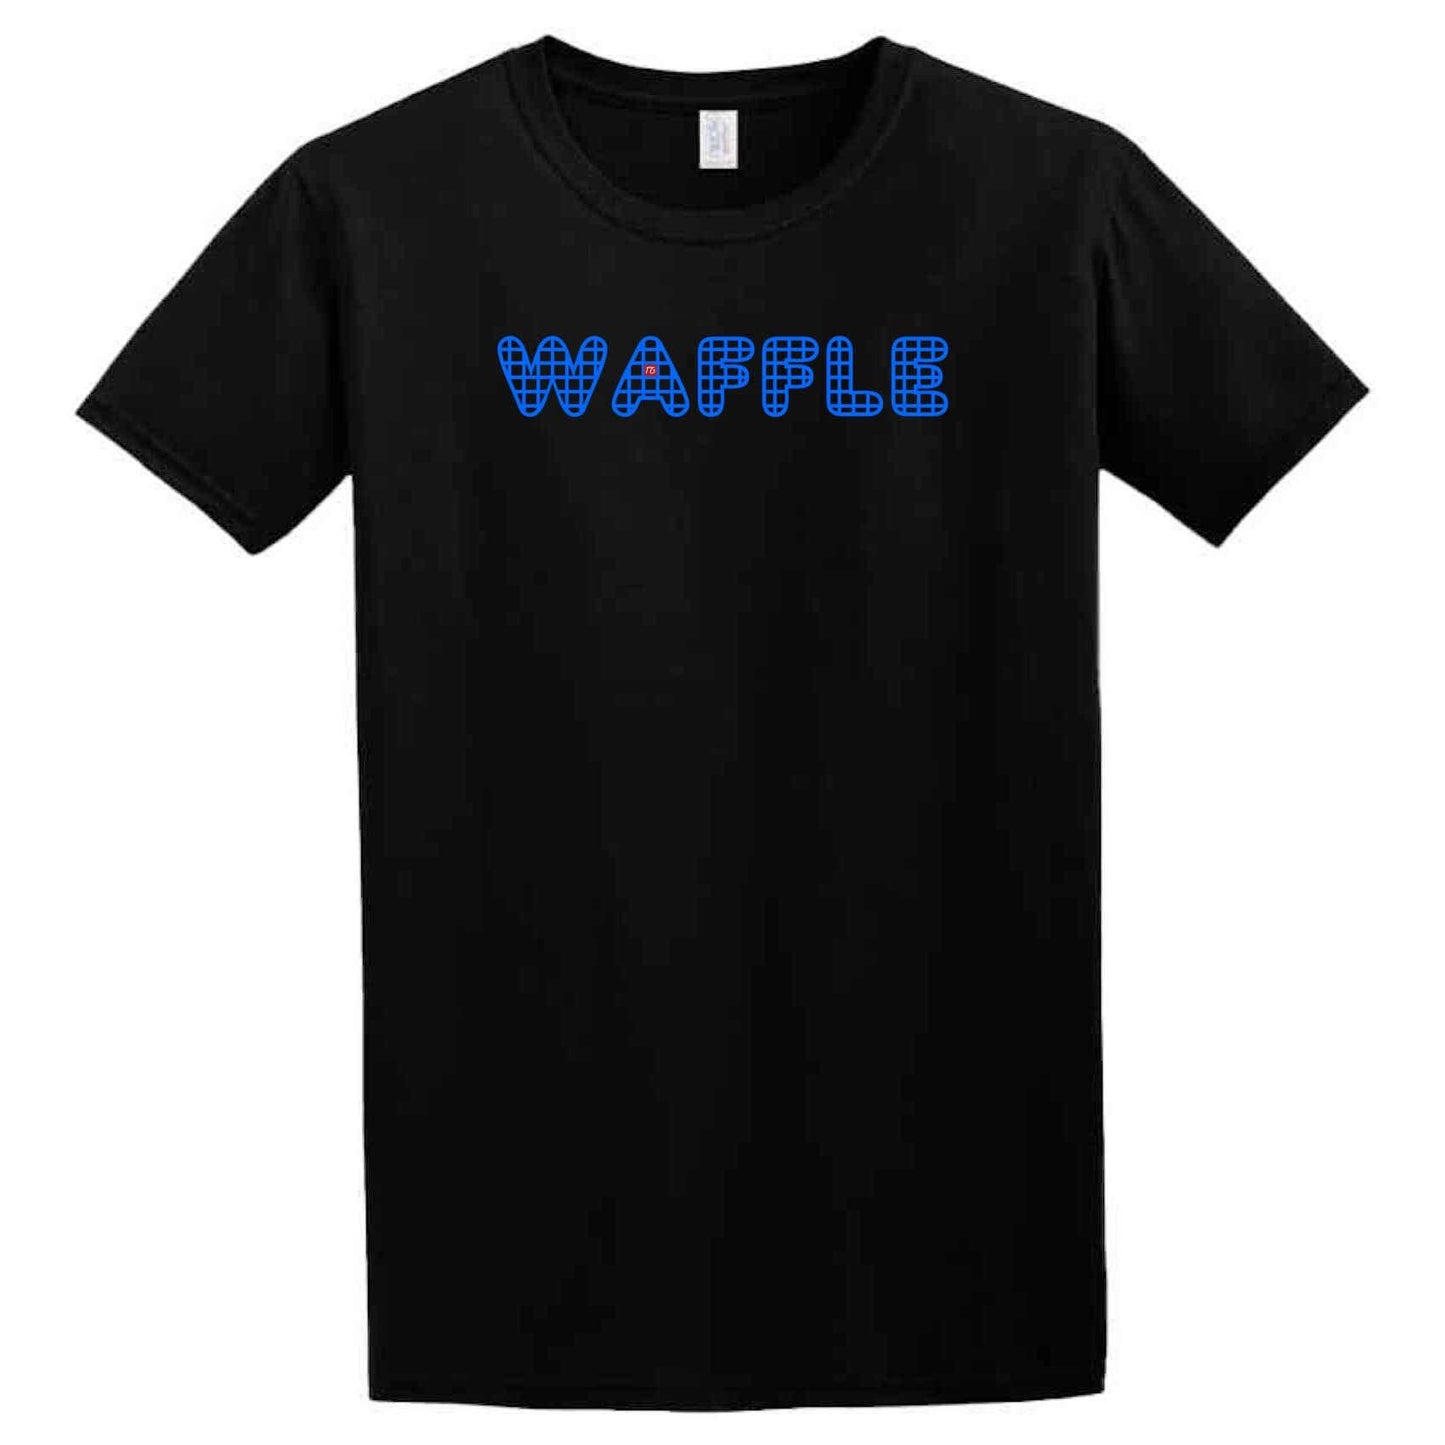 A Blue Waffle T-Shirt with the brand Twisted Gifts,